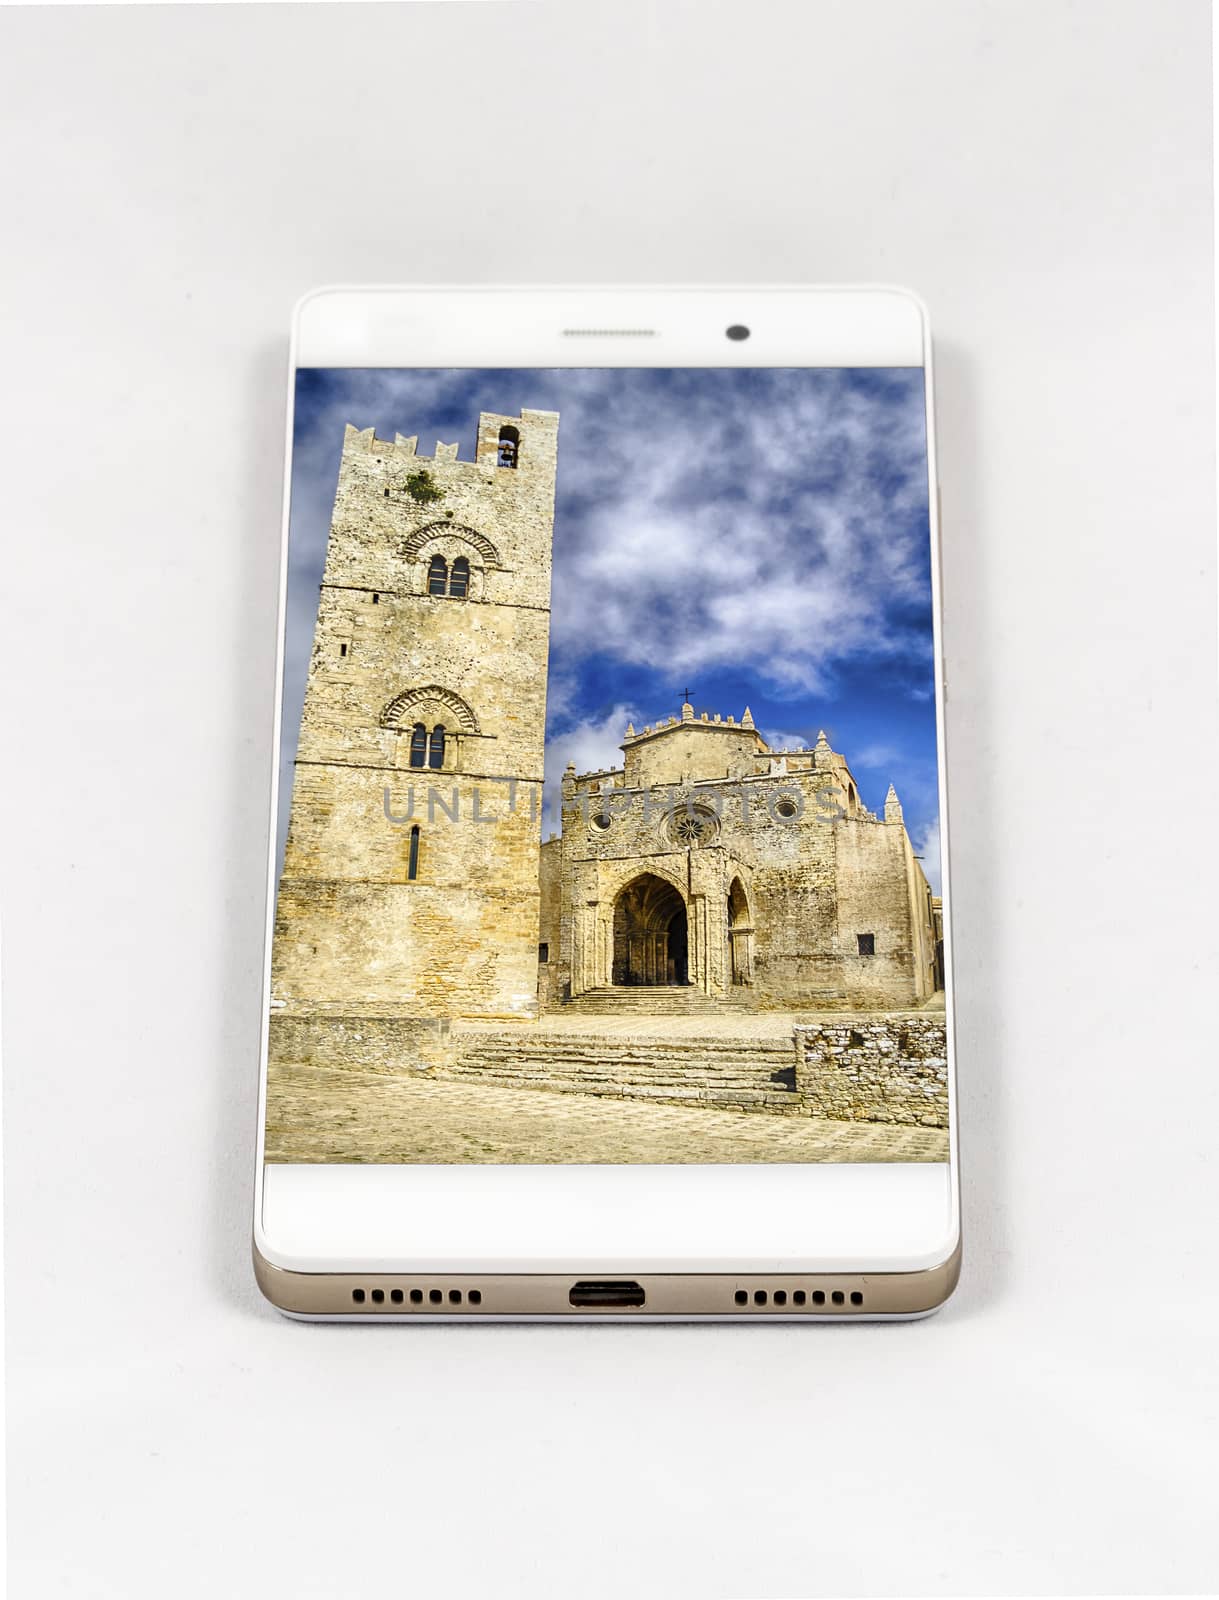 Modern smartphone with full screen picture of Erice Cathedral, Italy. Concept for travel smartphone photography. All images in this composition are made by me and separately available on my portfolio